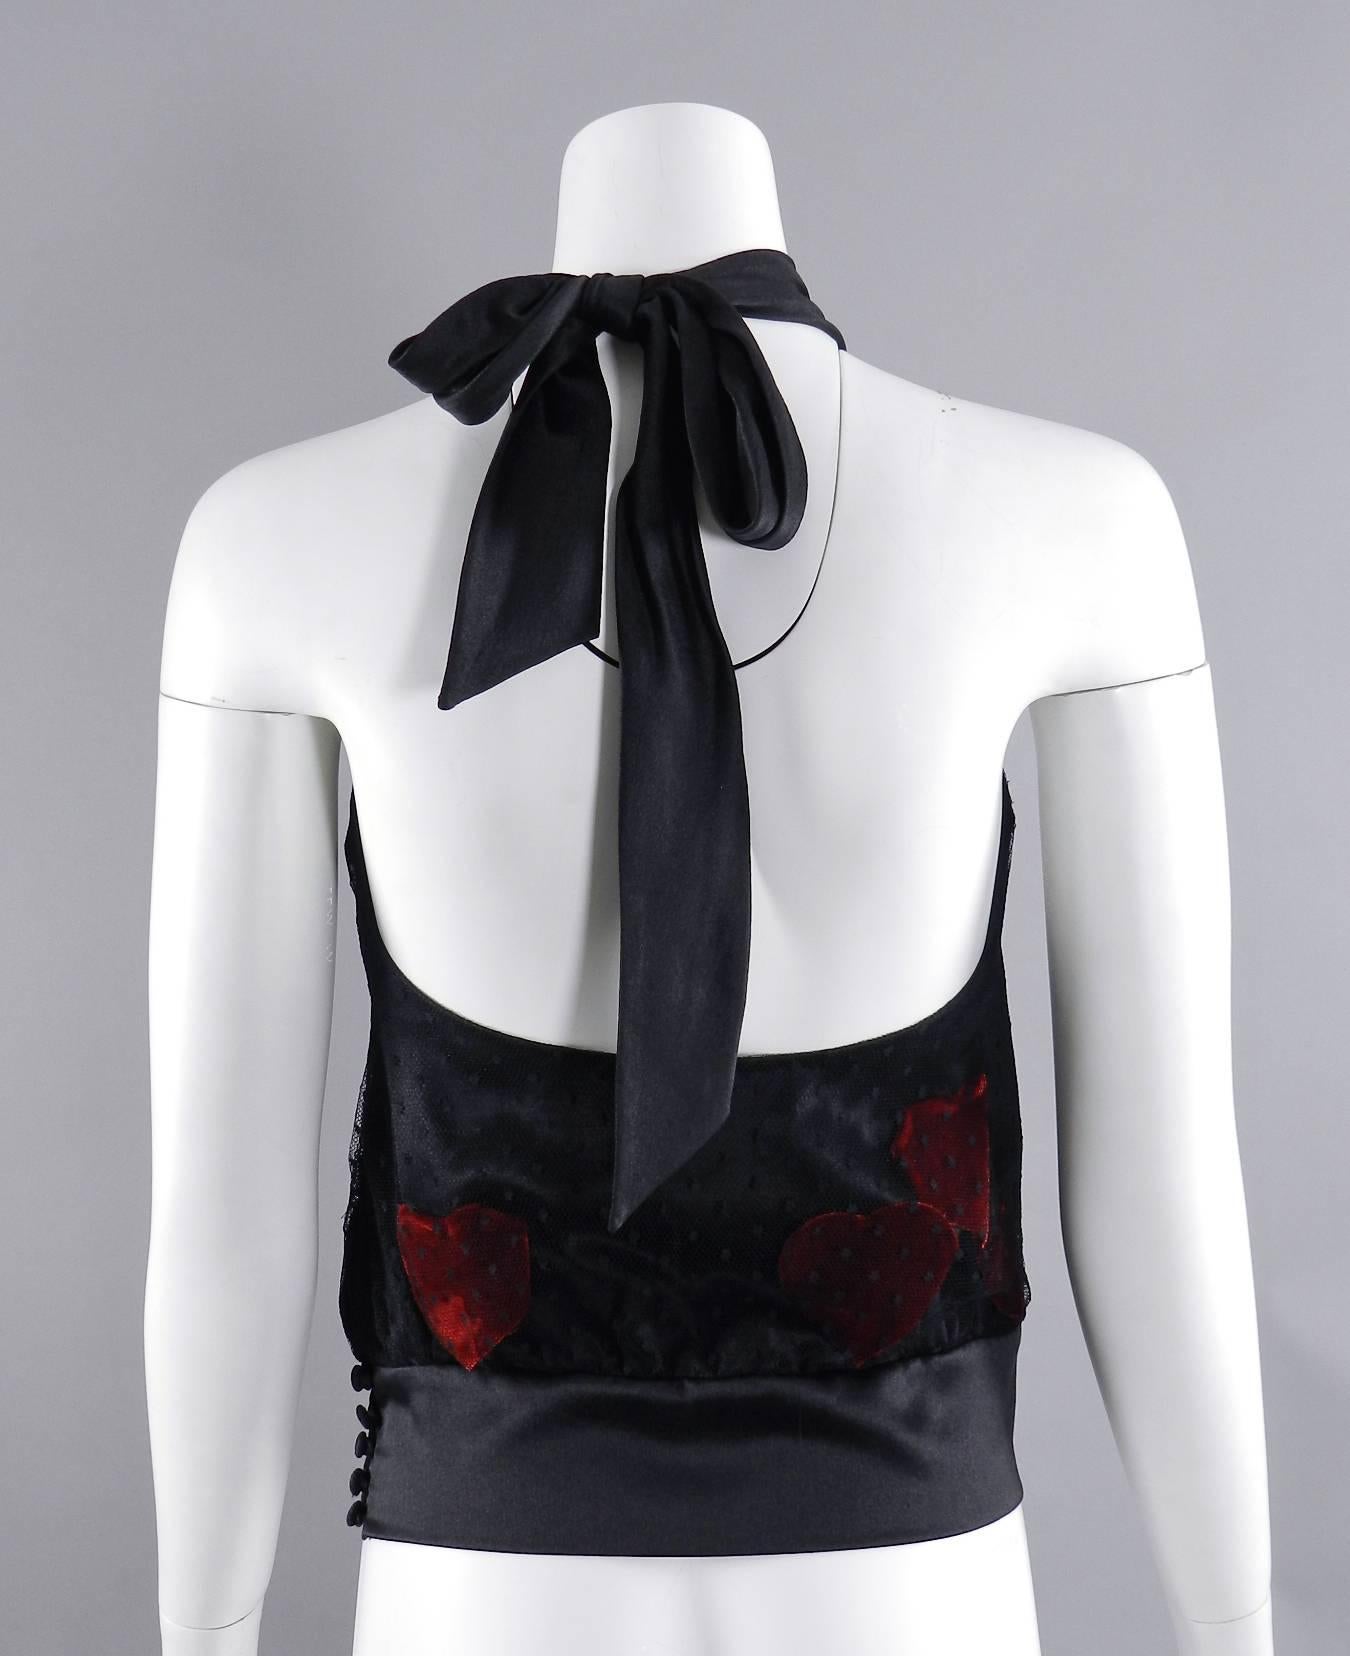 Women's Moschino black lace halter top with red velvet rose and hearts